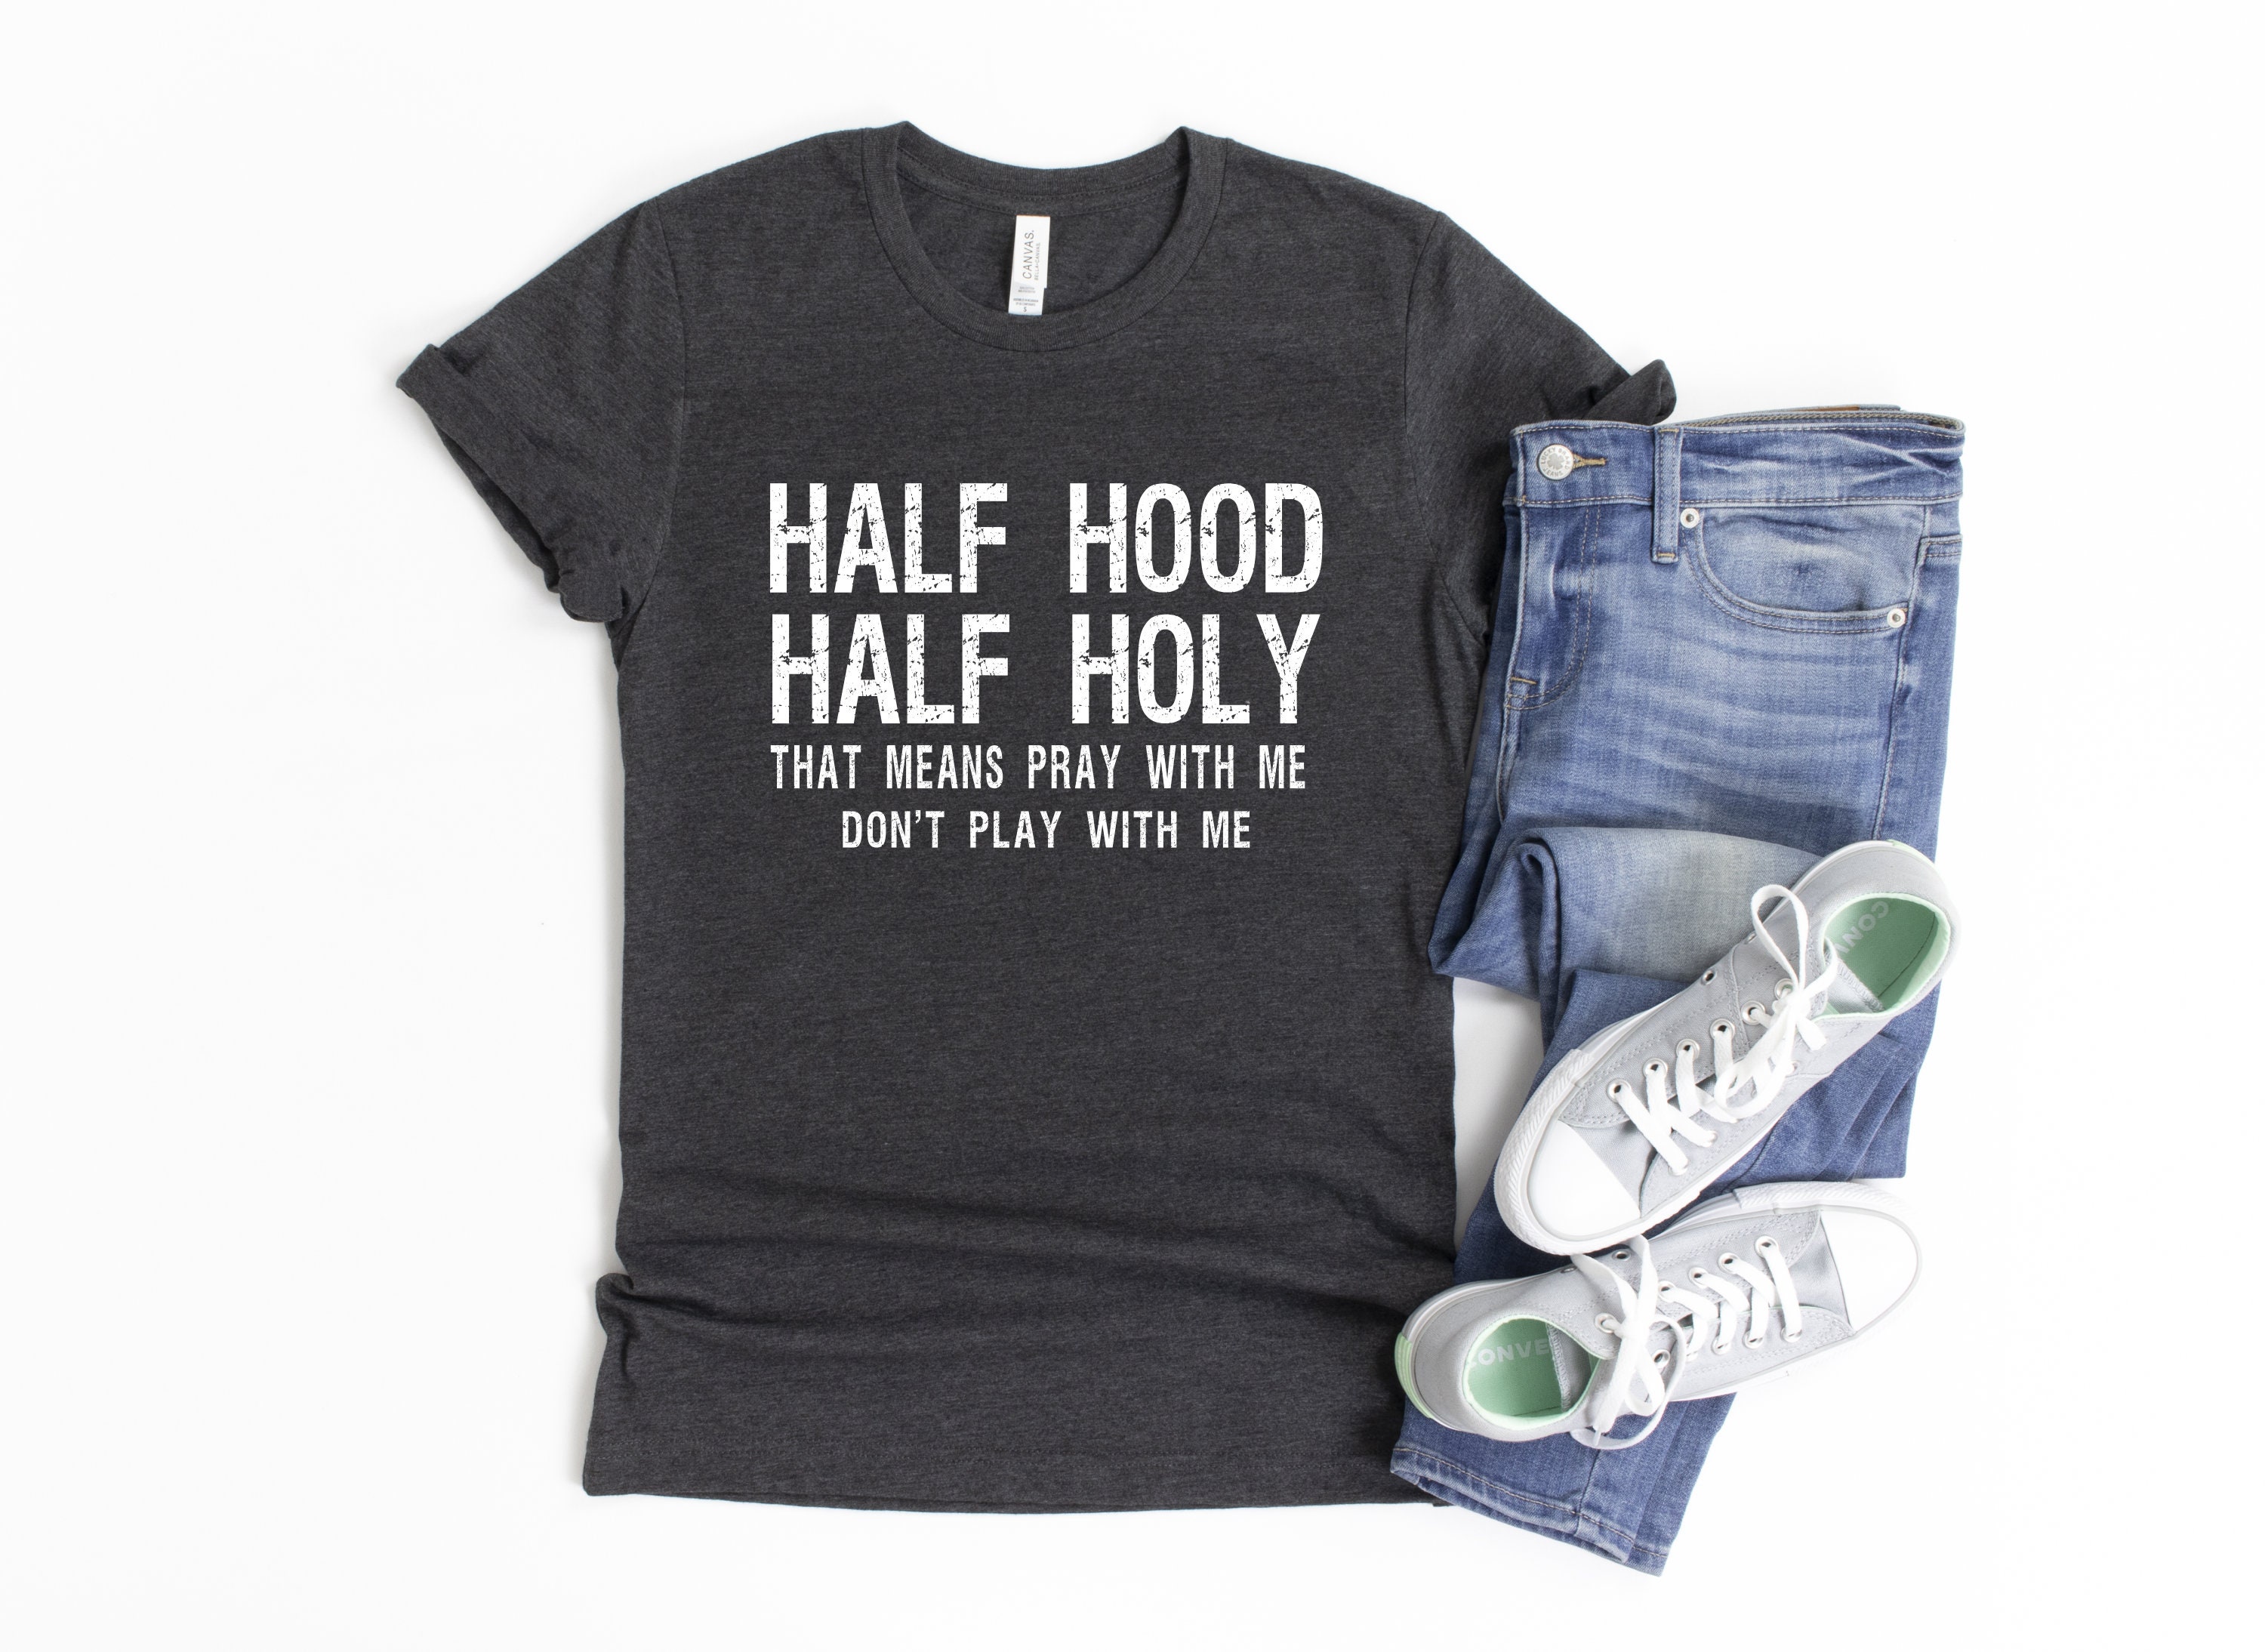 Half Hood Shirt Half Hood Half Holy Holy Shirt That Means - Etsy